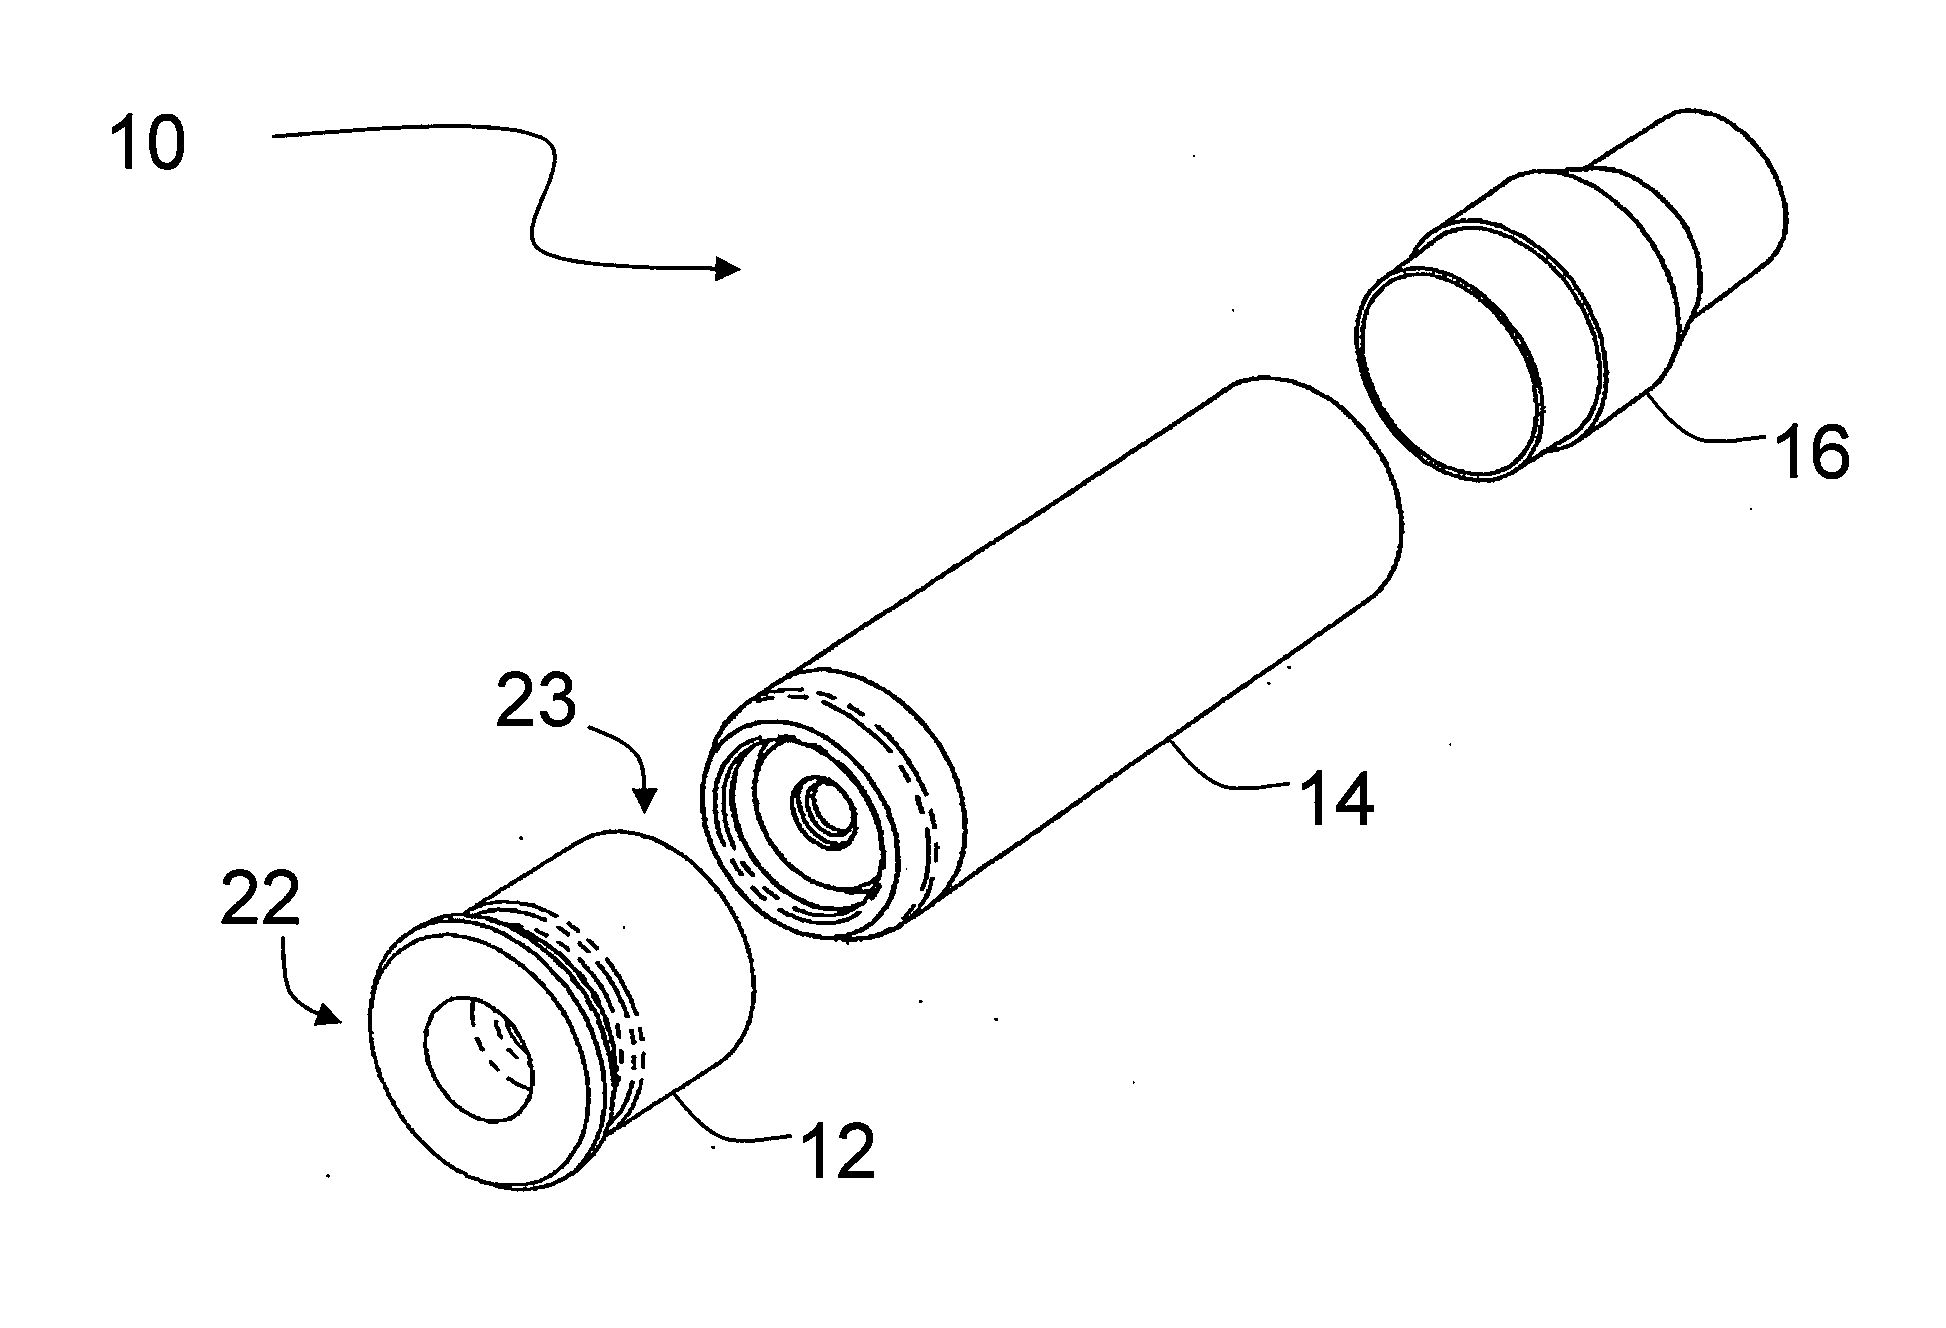 Ammunition cartridge case bodies made with polymeric nanocomposite material